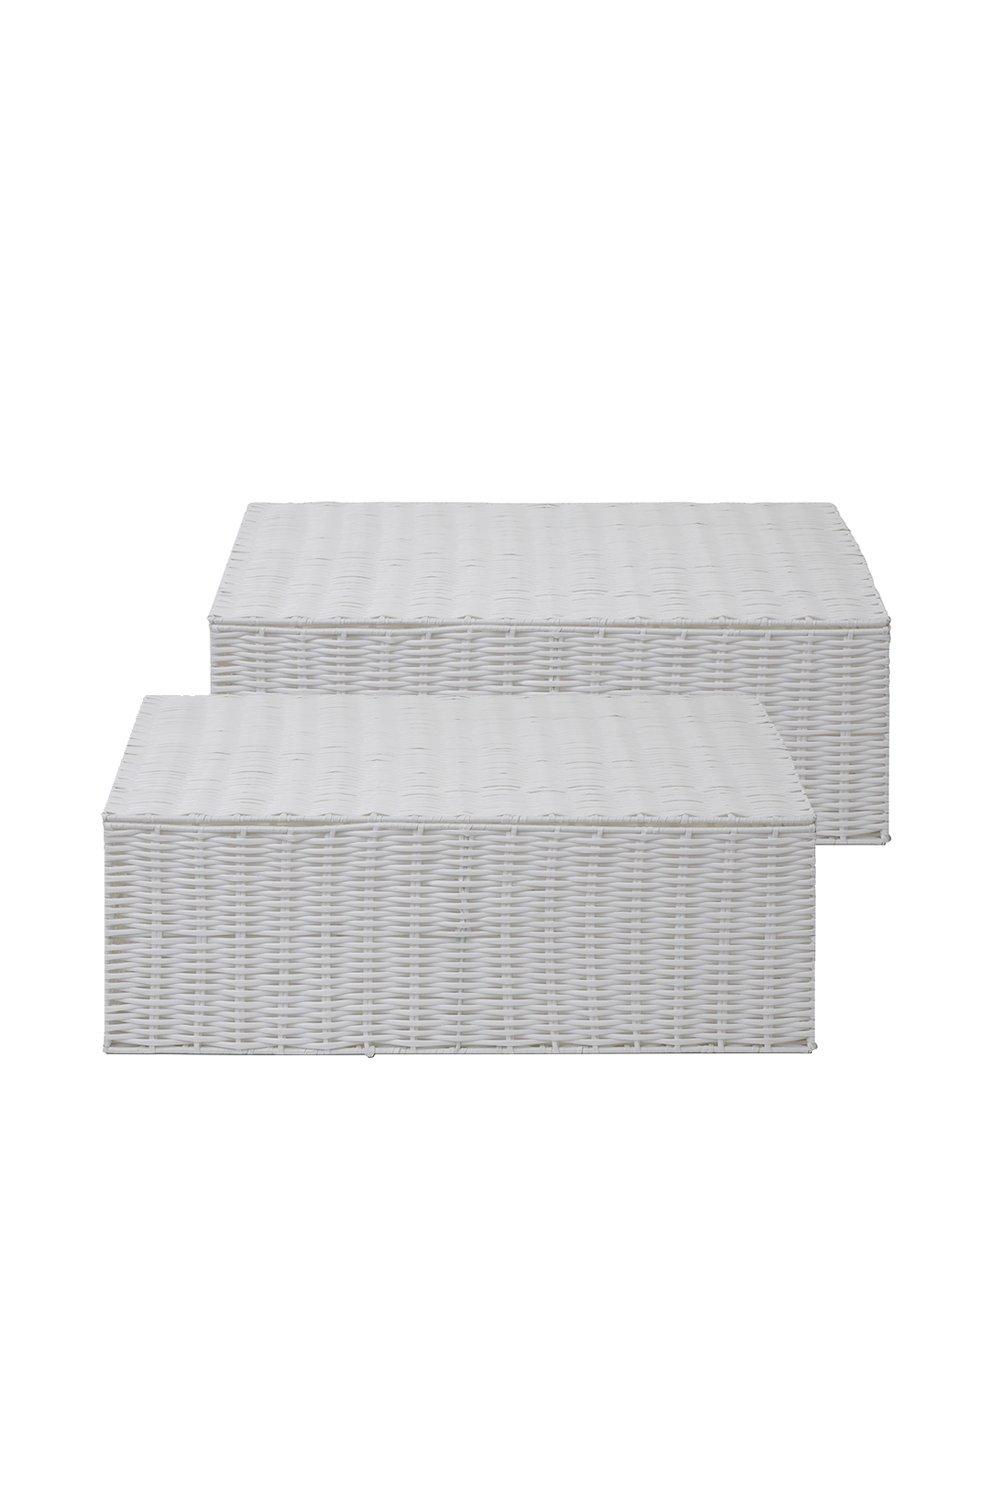 Resin Woven Under Bed Storage Box, Chest Shelf Toy Clothes Basket With Lid - White (Set of 2 - Large